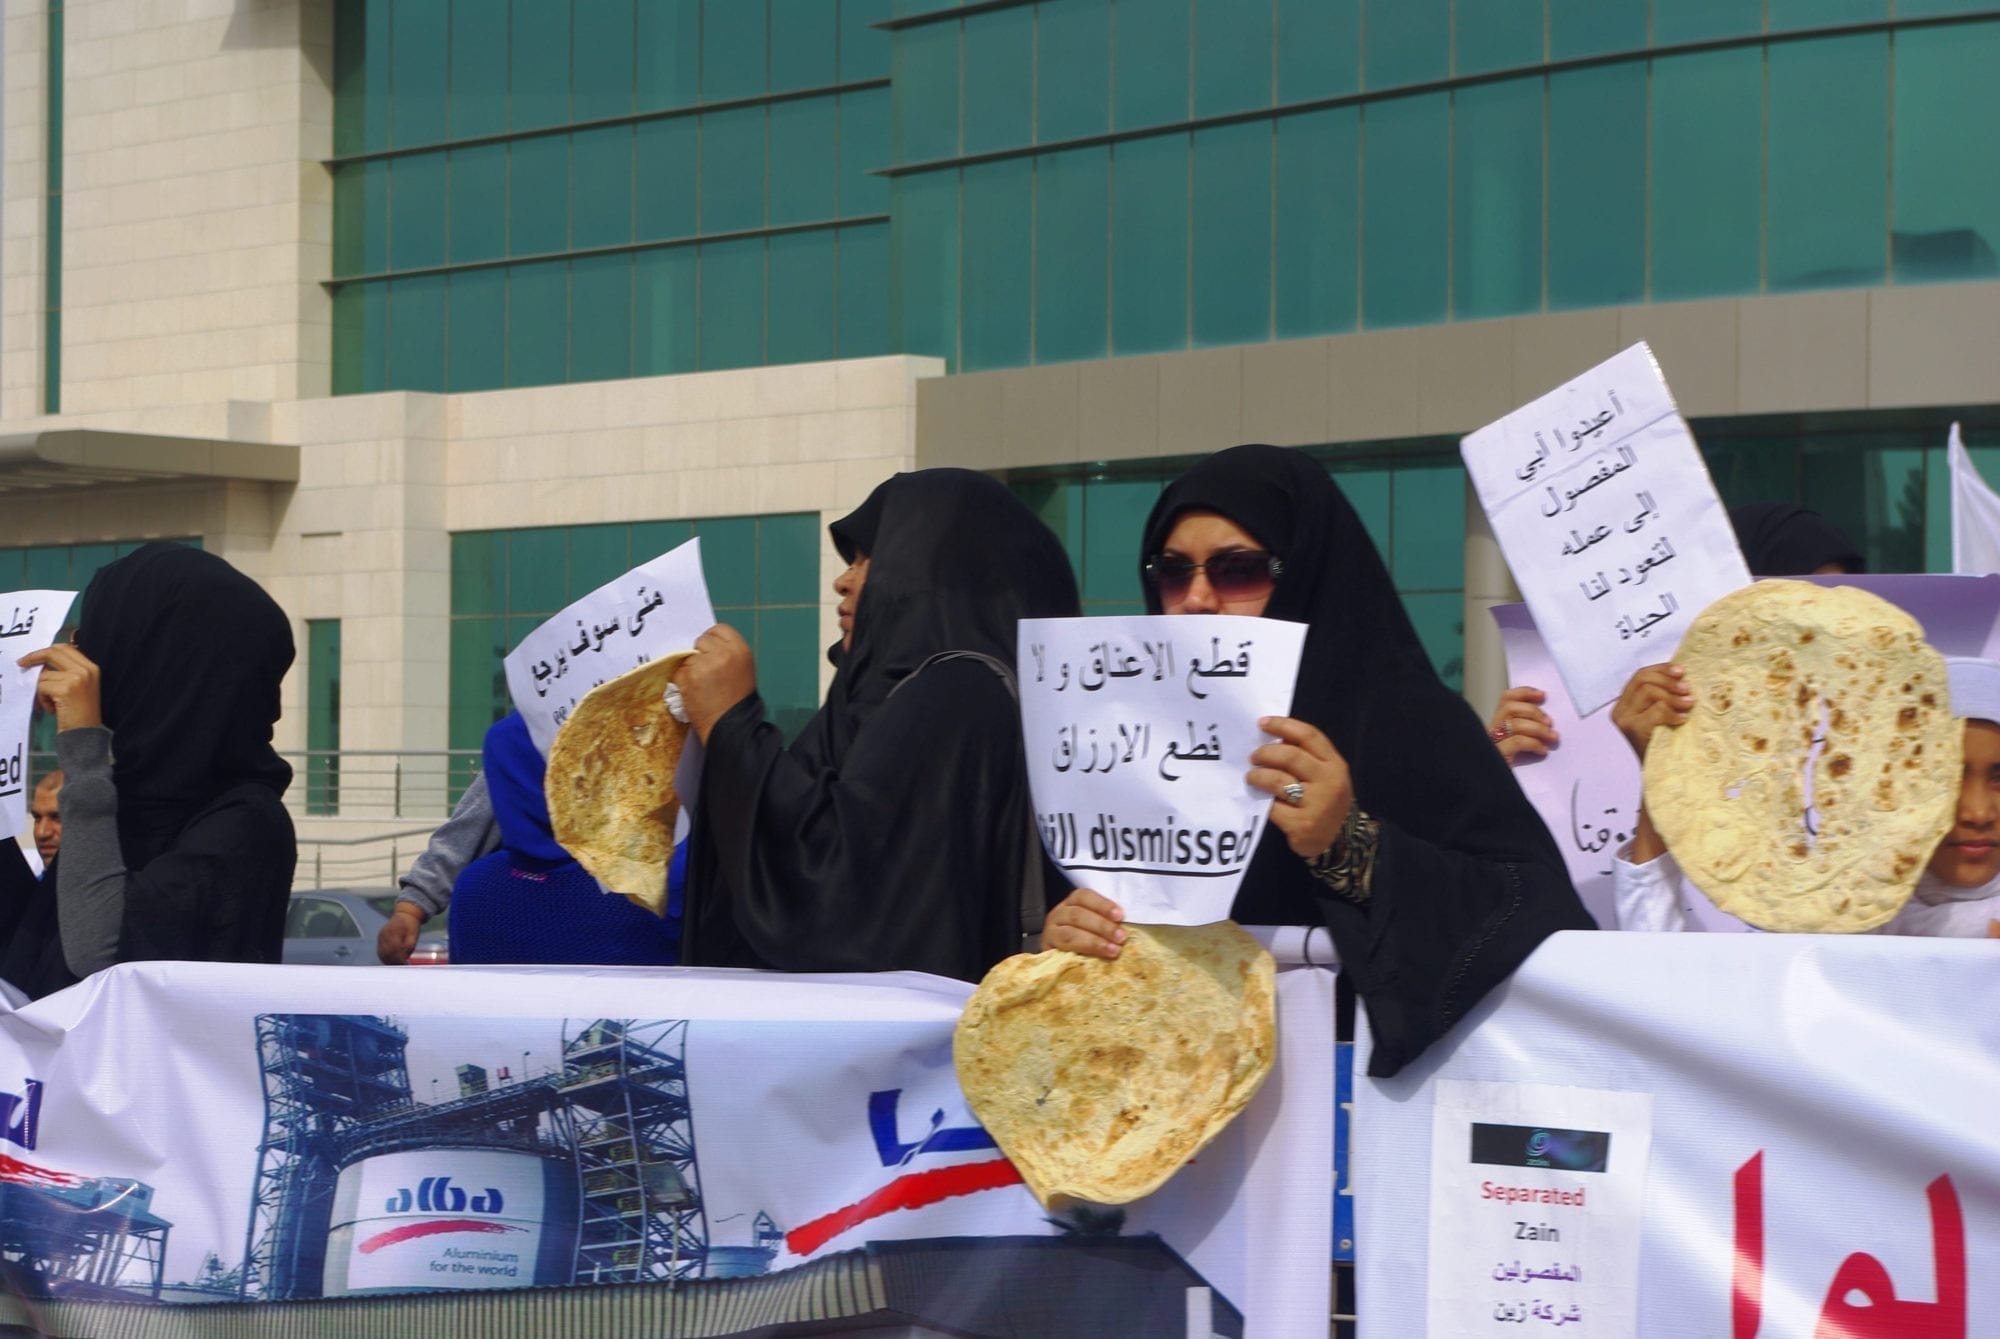 Fired women protest in front of Bahrain Labor Ministry